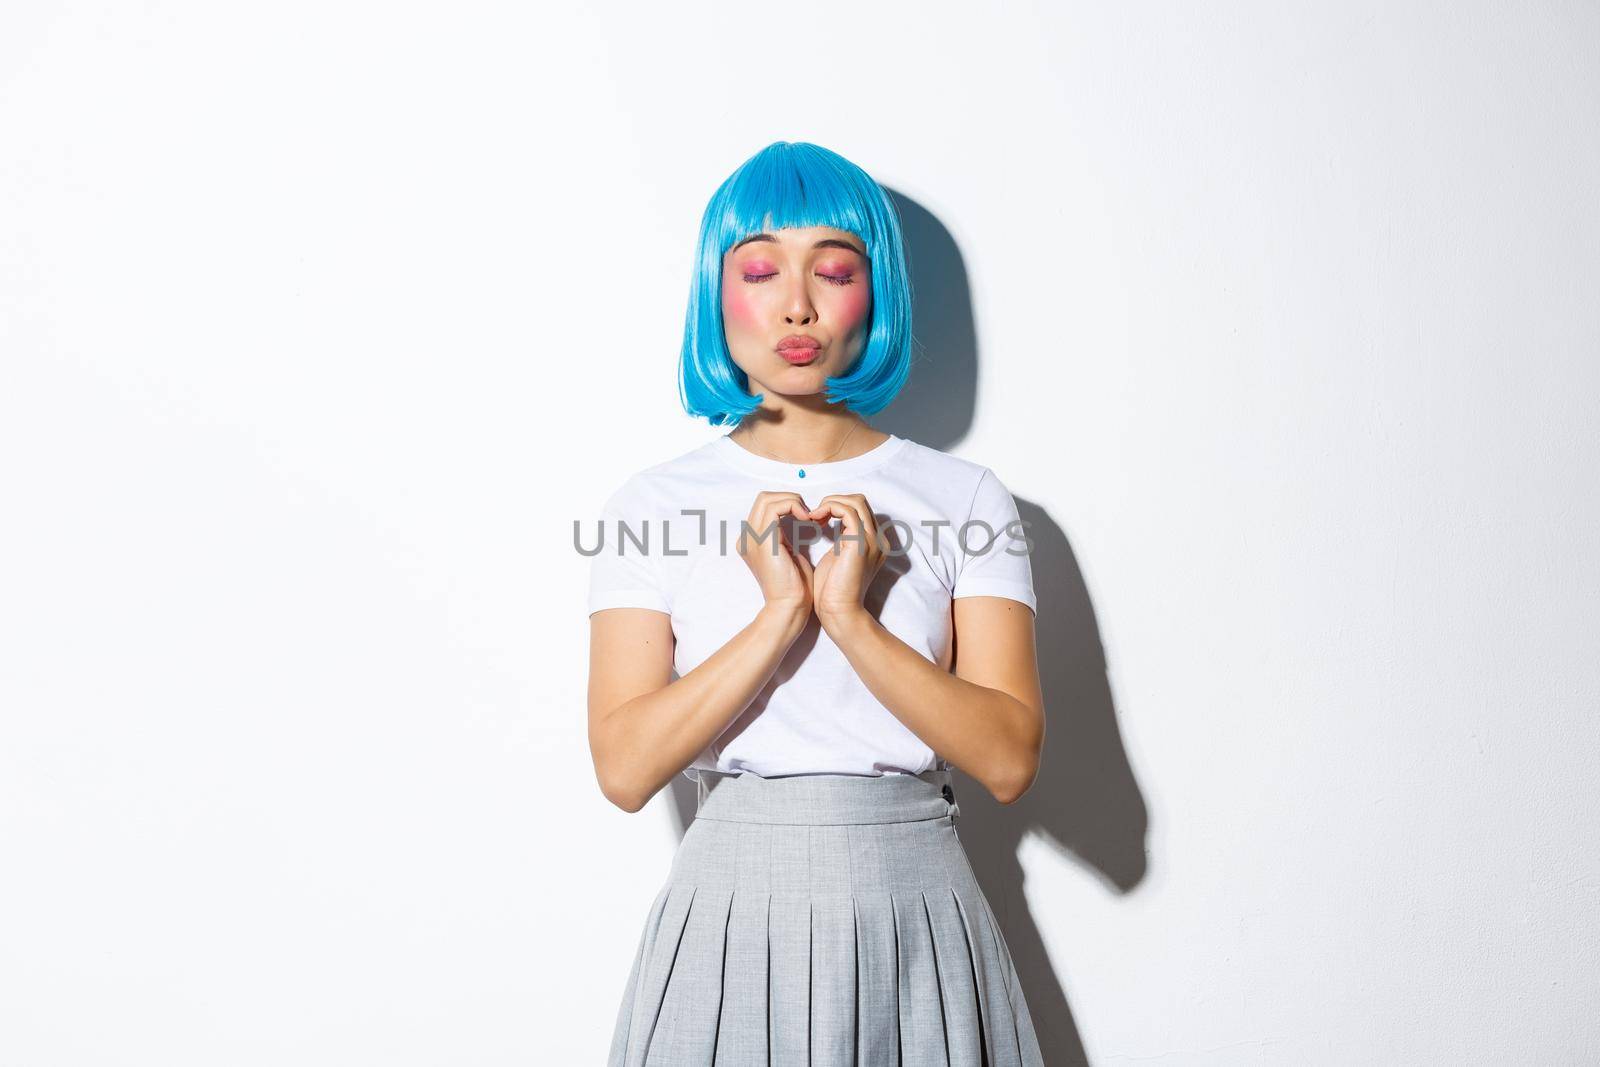 Portrait of lovely asian girl in blue wig and halloween costume, close eyes and pouting while showing heart gesture, daydreaming, standing over white background.